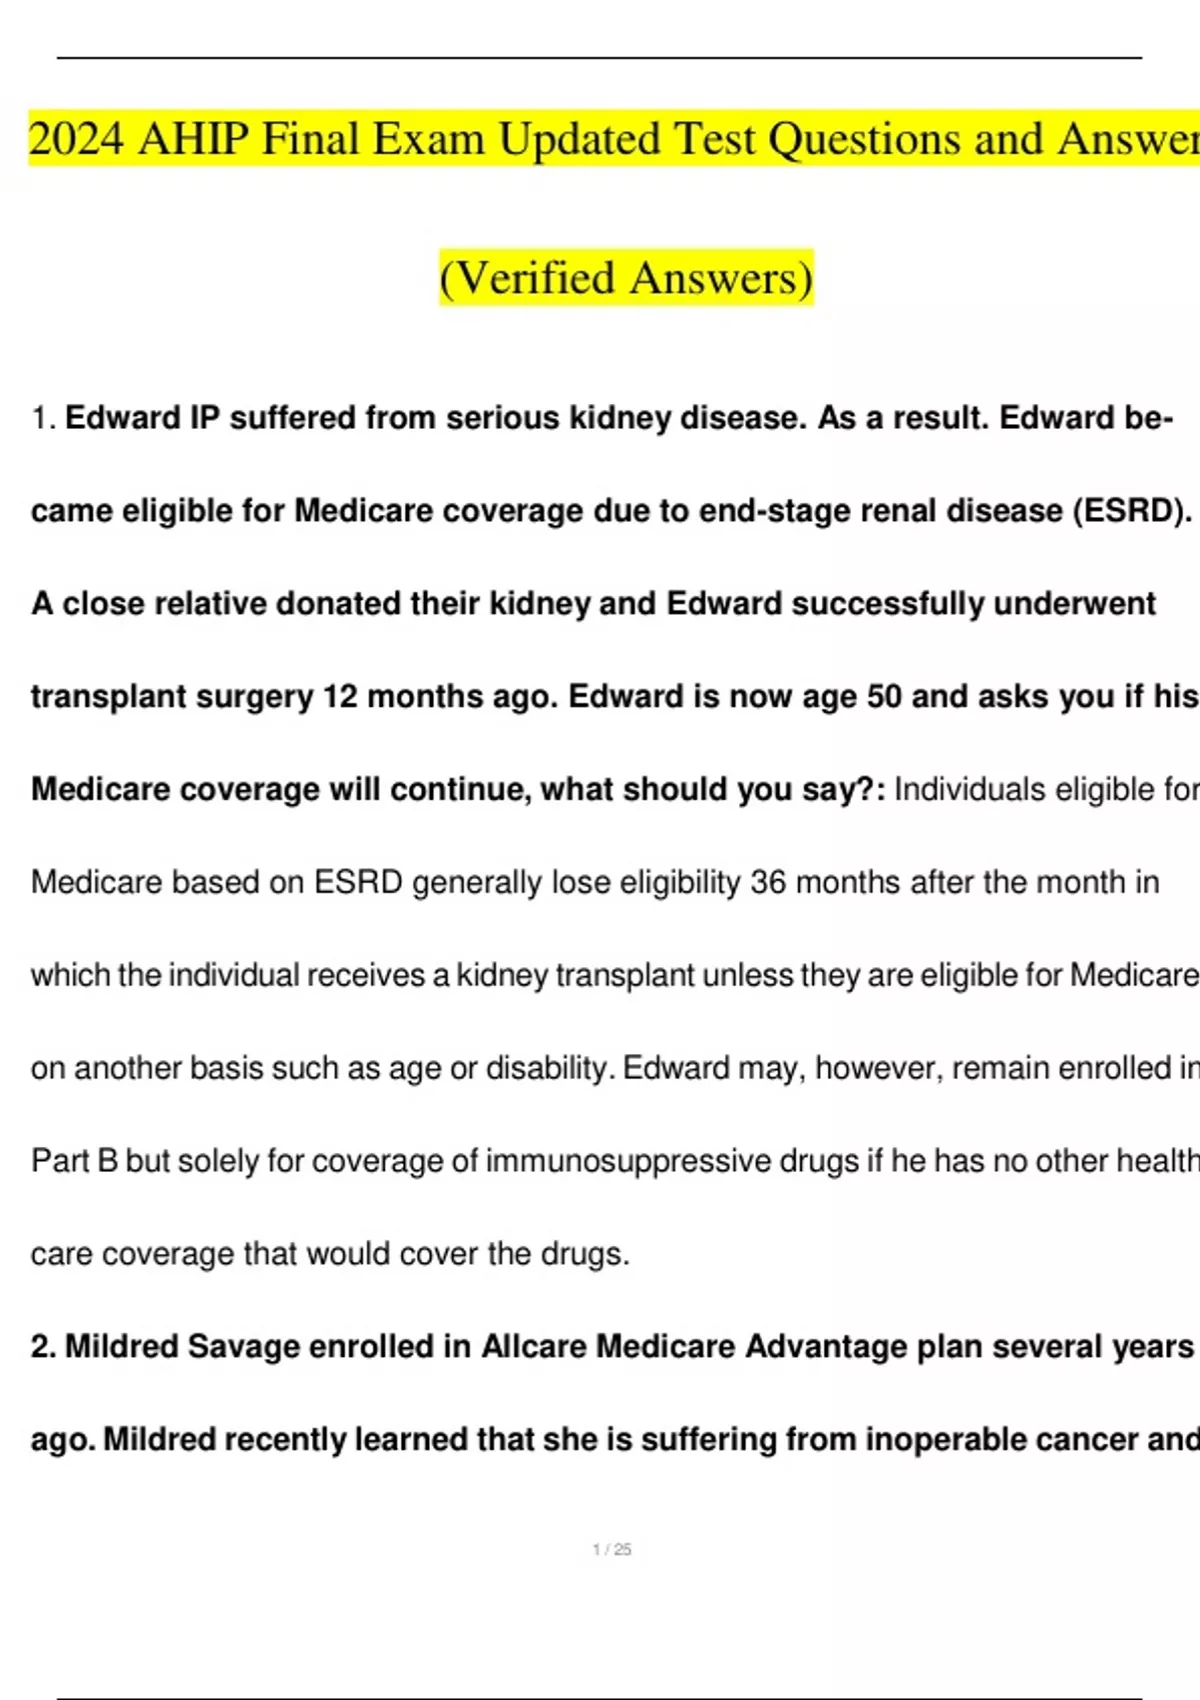 AHIP 2024 Final Exam Test Updated Questions and Answers (Verified